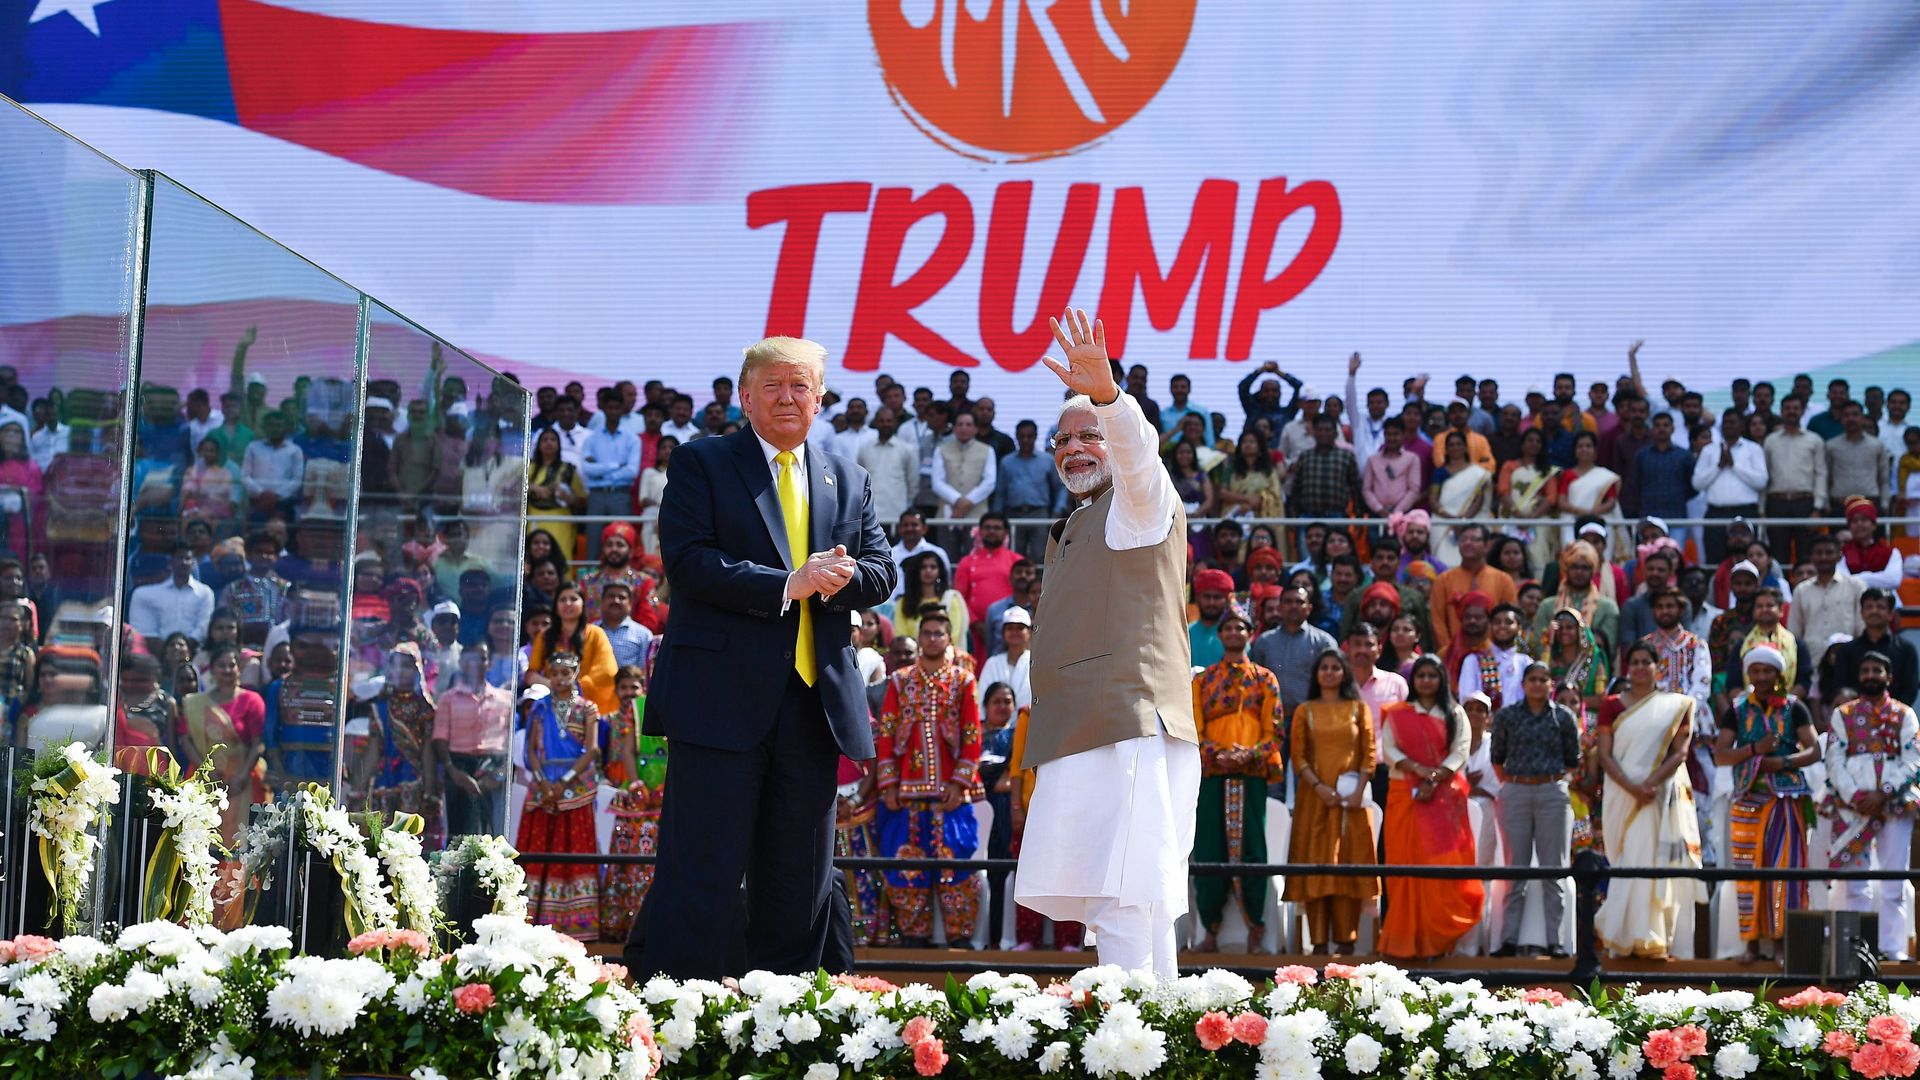  Donald Trump (L) looks on as India's Prime Minister Narendra Modi waves during 'Namaste Trump' rally